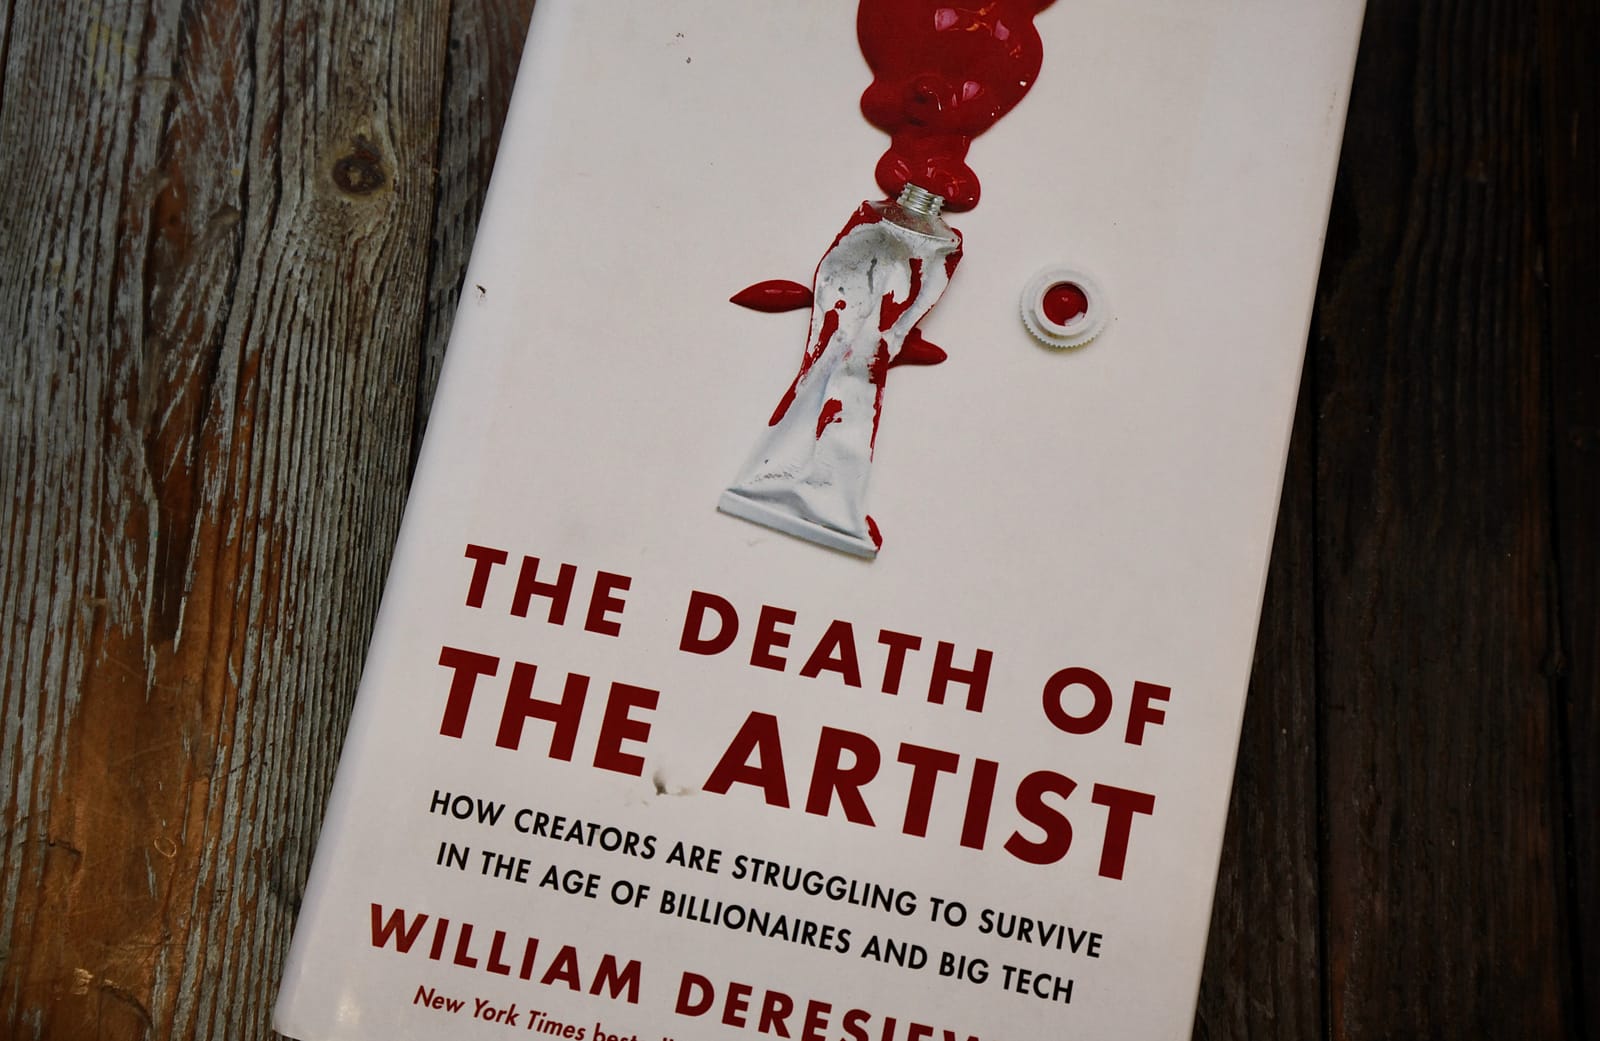 Death of the artist